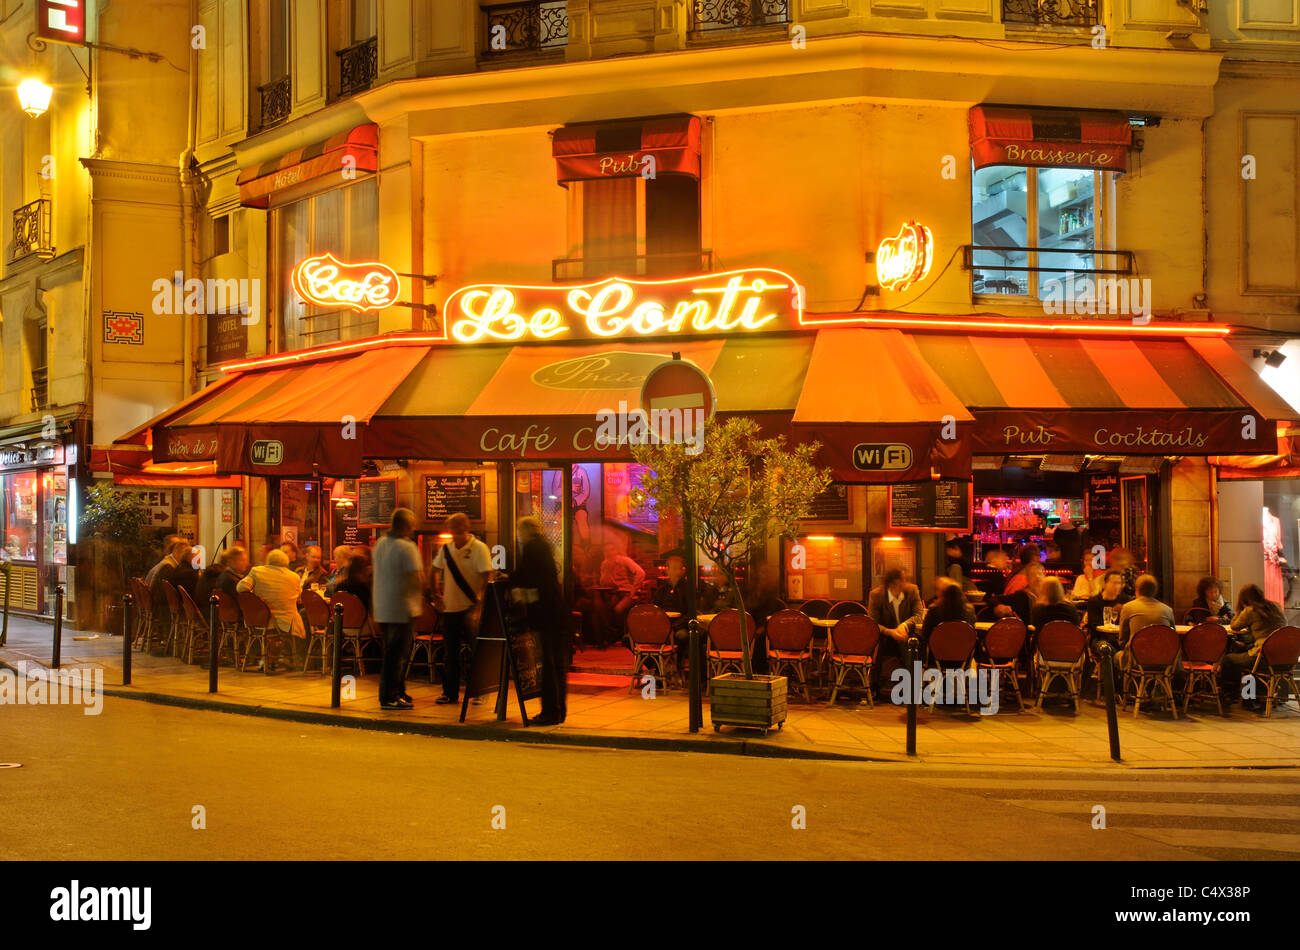 People sitting outside a restaurant in St Germain area of Paris at night Stock Photo